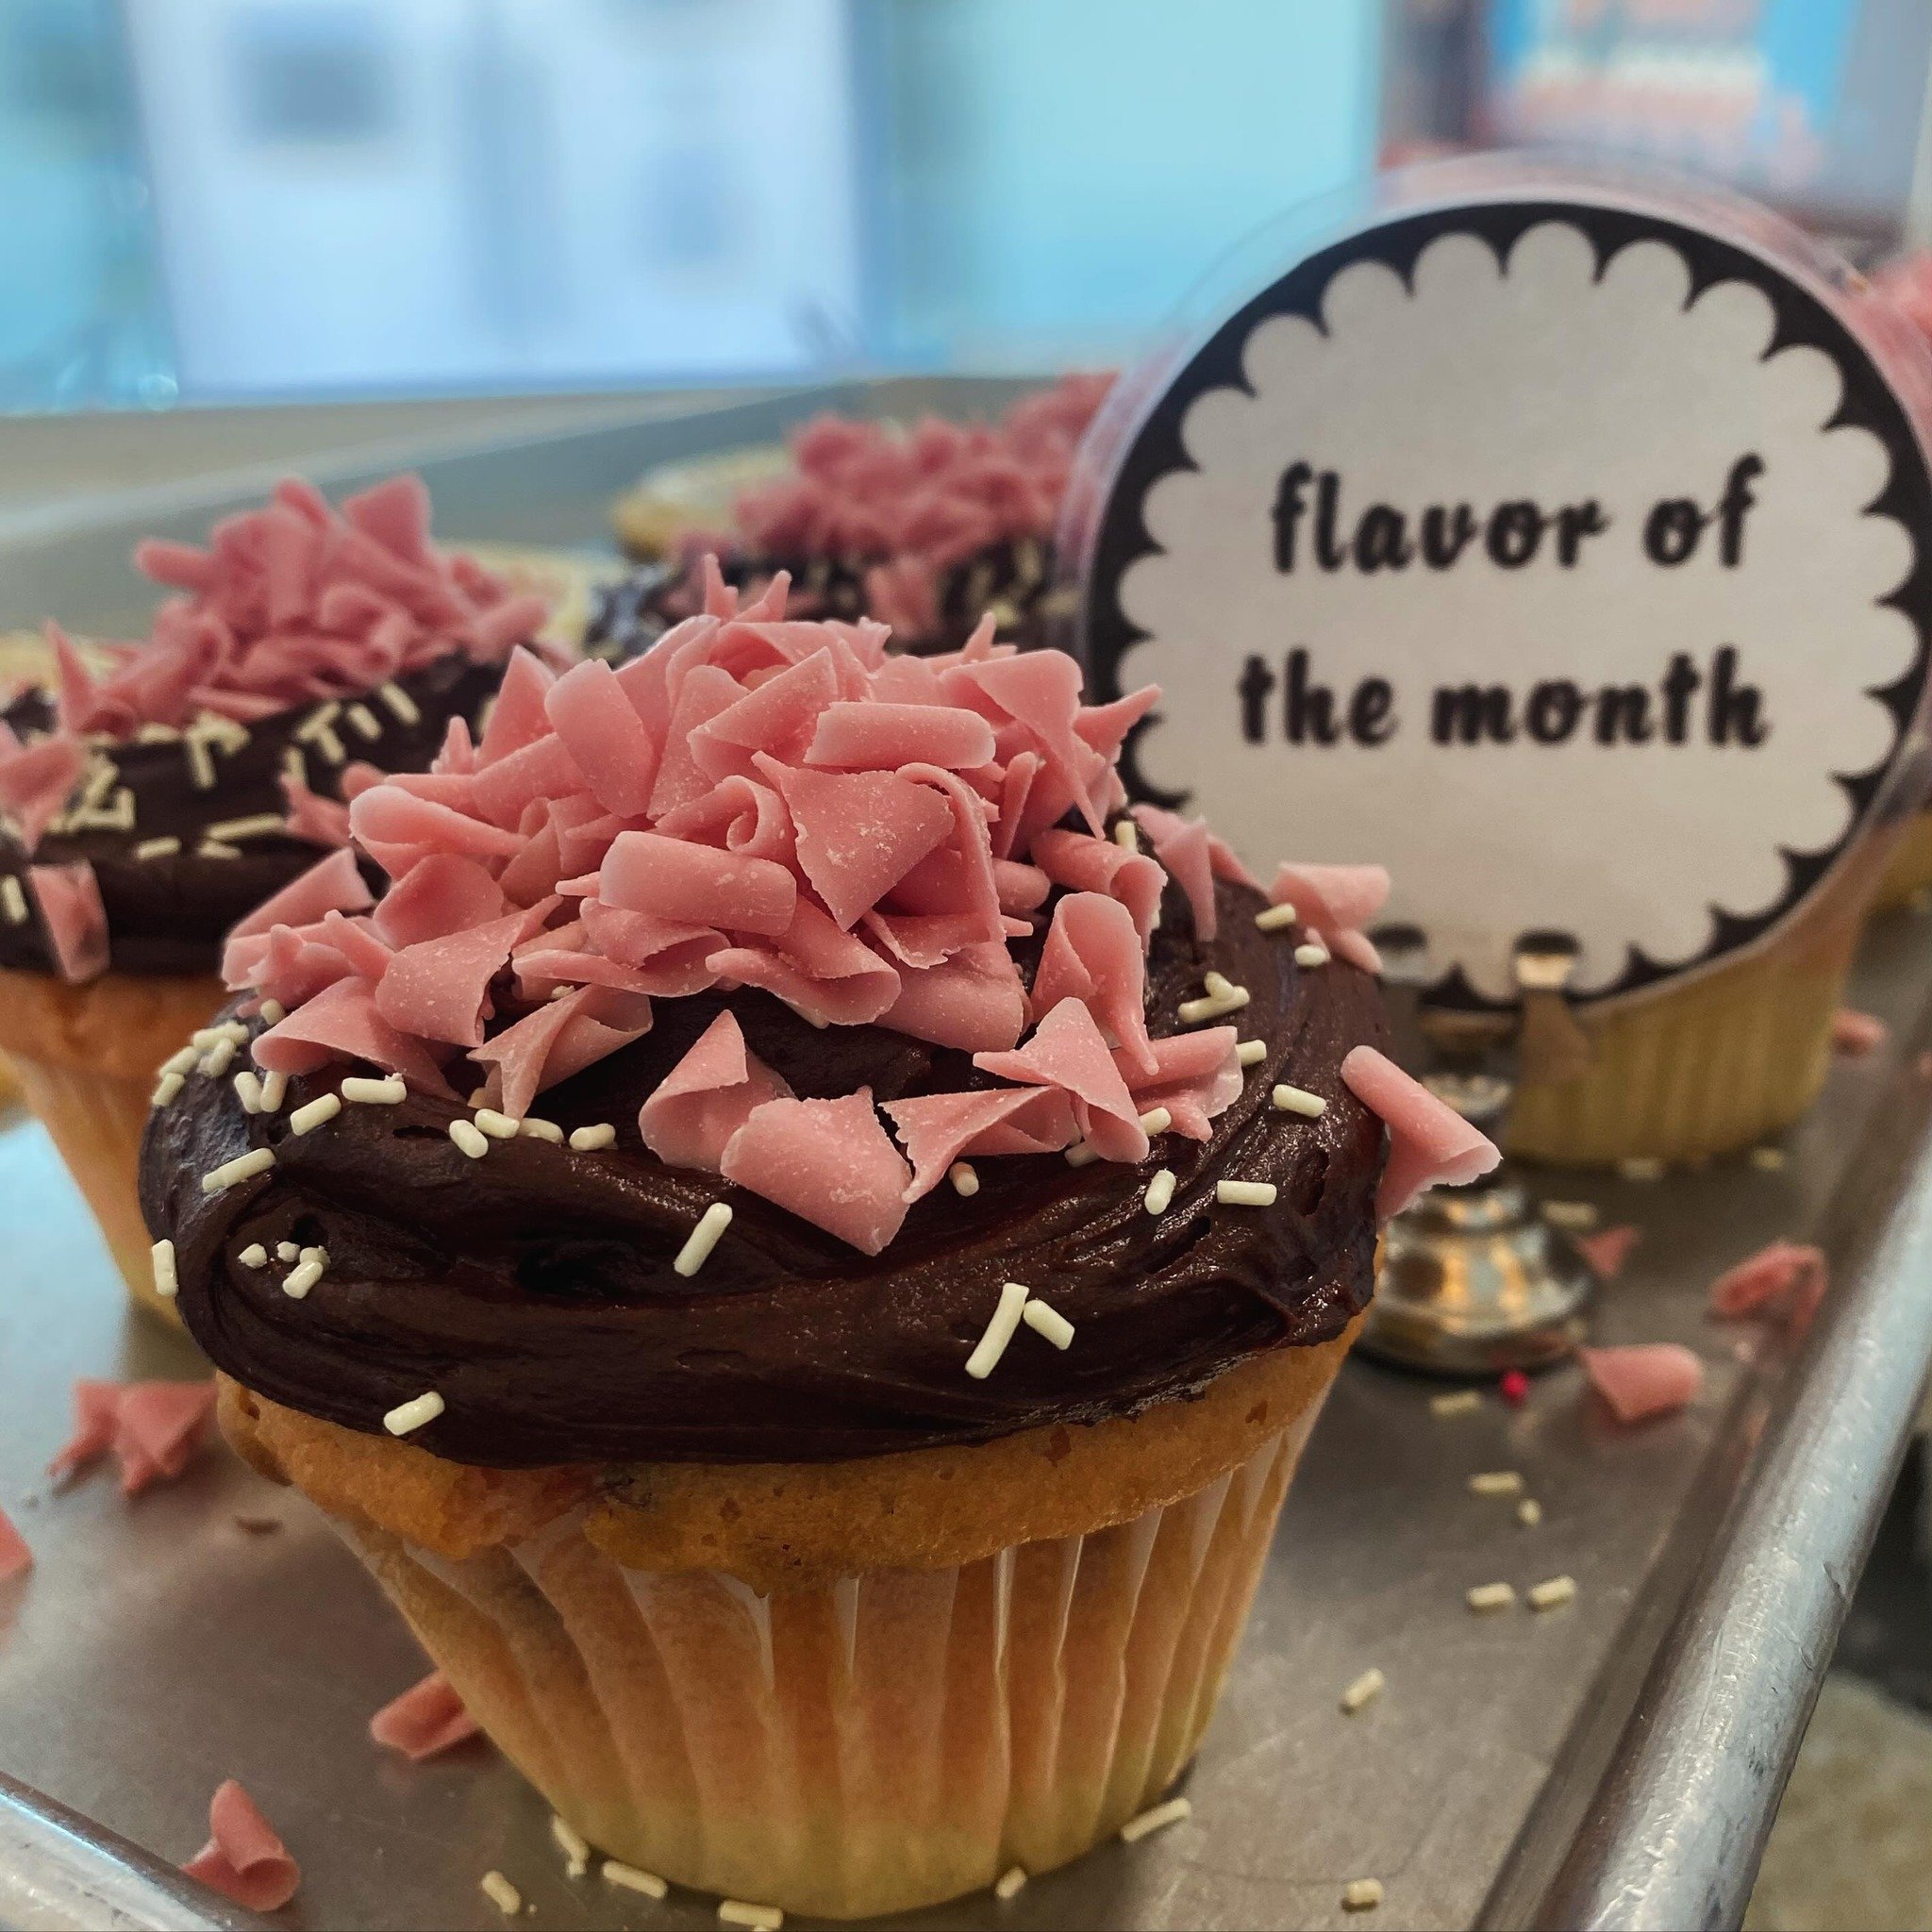 Today&rsquo;s your last chance to get our April FOM, Neapolitan. Tomorrow we&rsquo;re bringing back our Raspberry Cream Cheese, just in time for Mother&rsquo;s Day! #frostedcupcakery #belmontshore #cupcakes